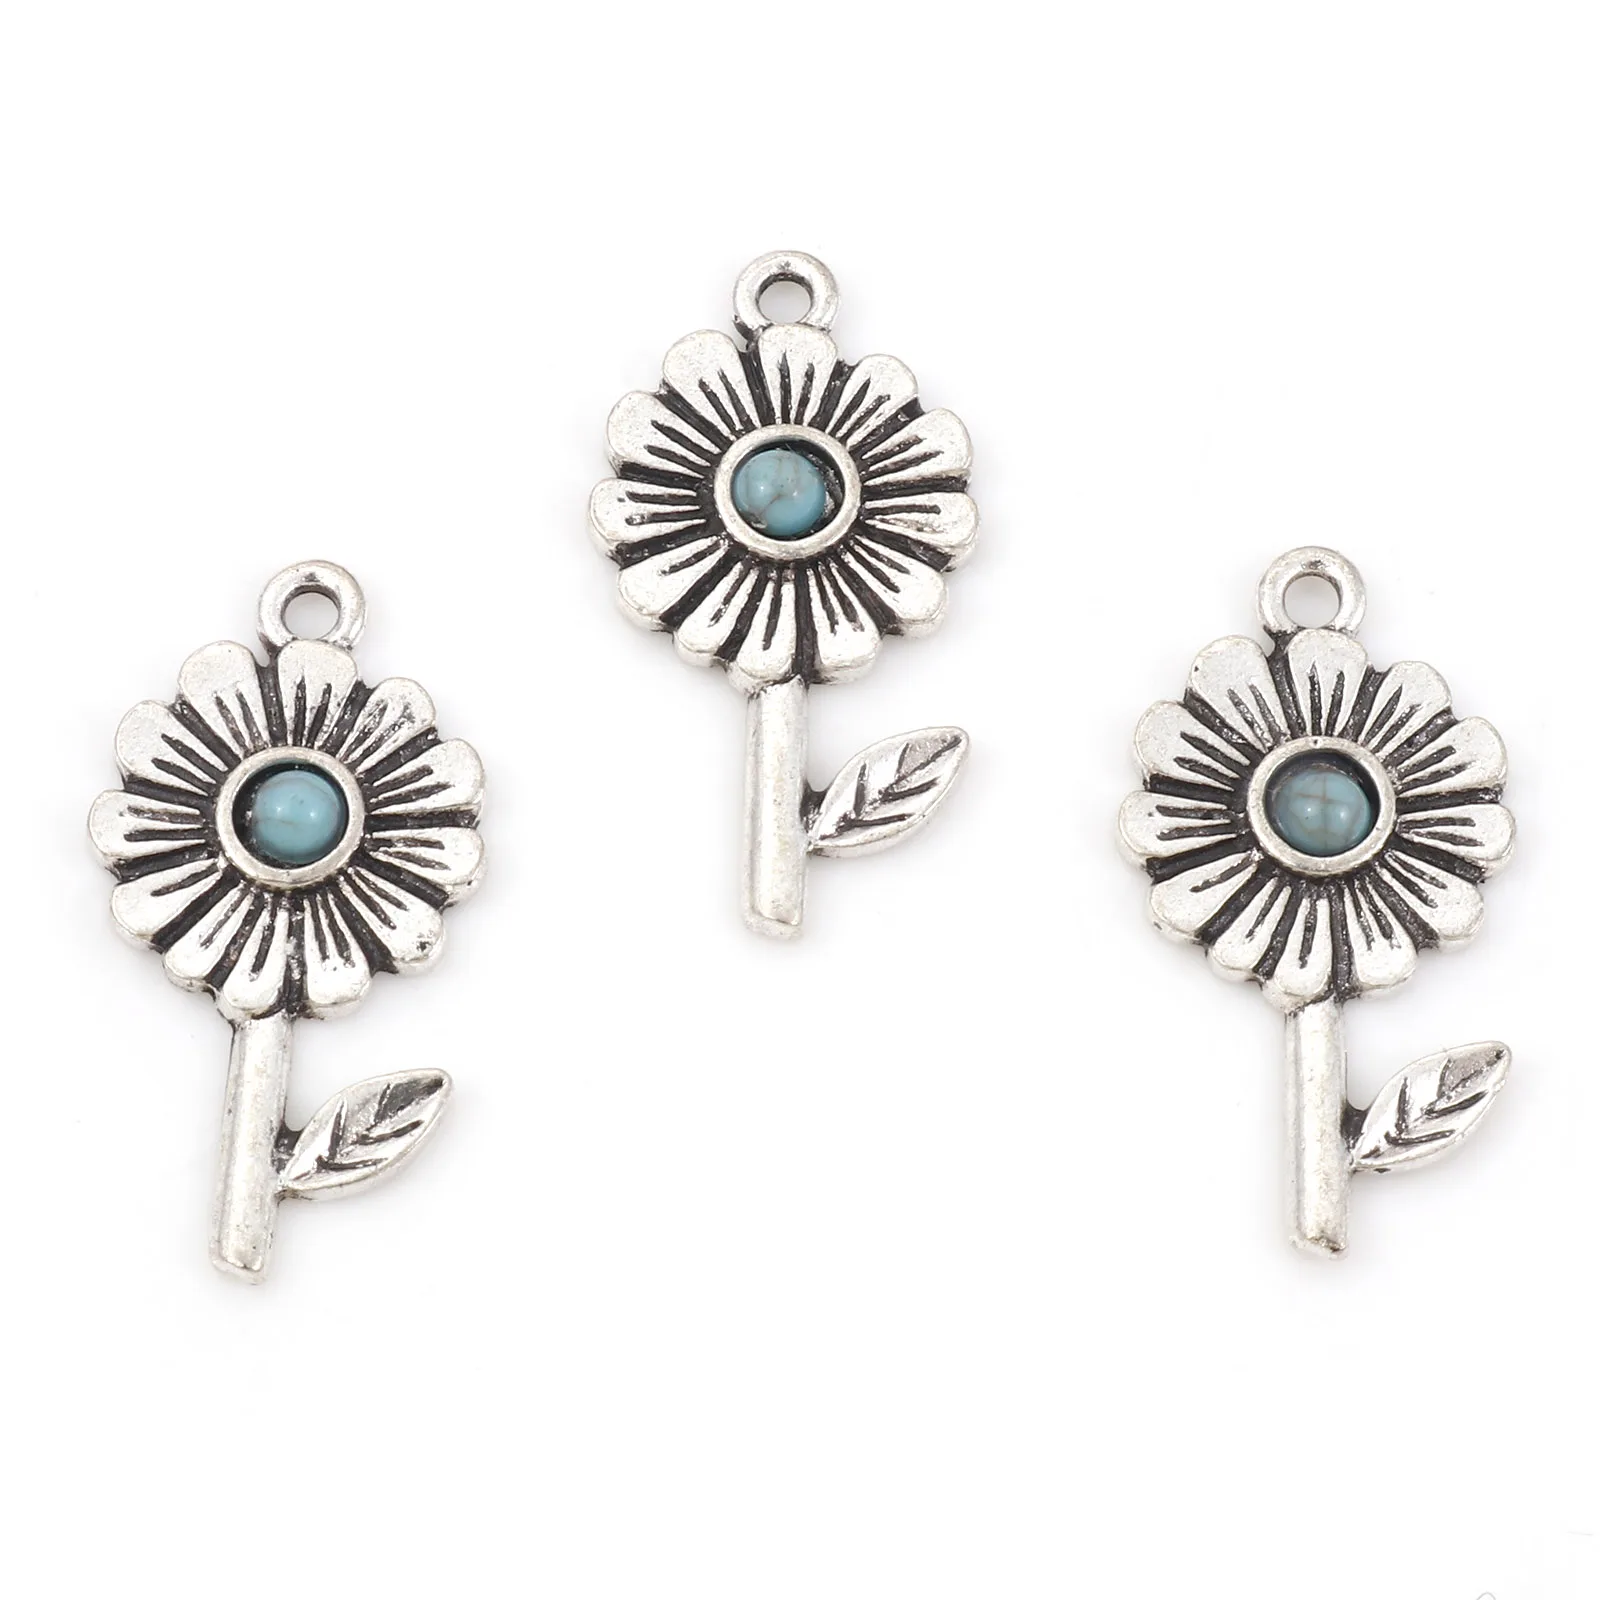 

10PCs Bohemian Charms Antique Silver Color Sunflower With Resin Cabochons Green Blue Imitation Turquoise Pendant Jewelry 25x13mm